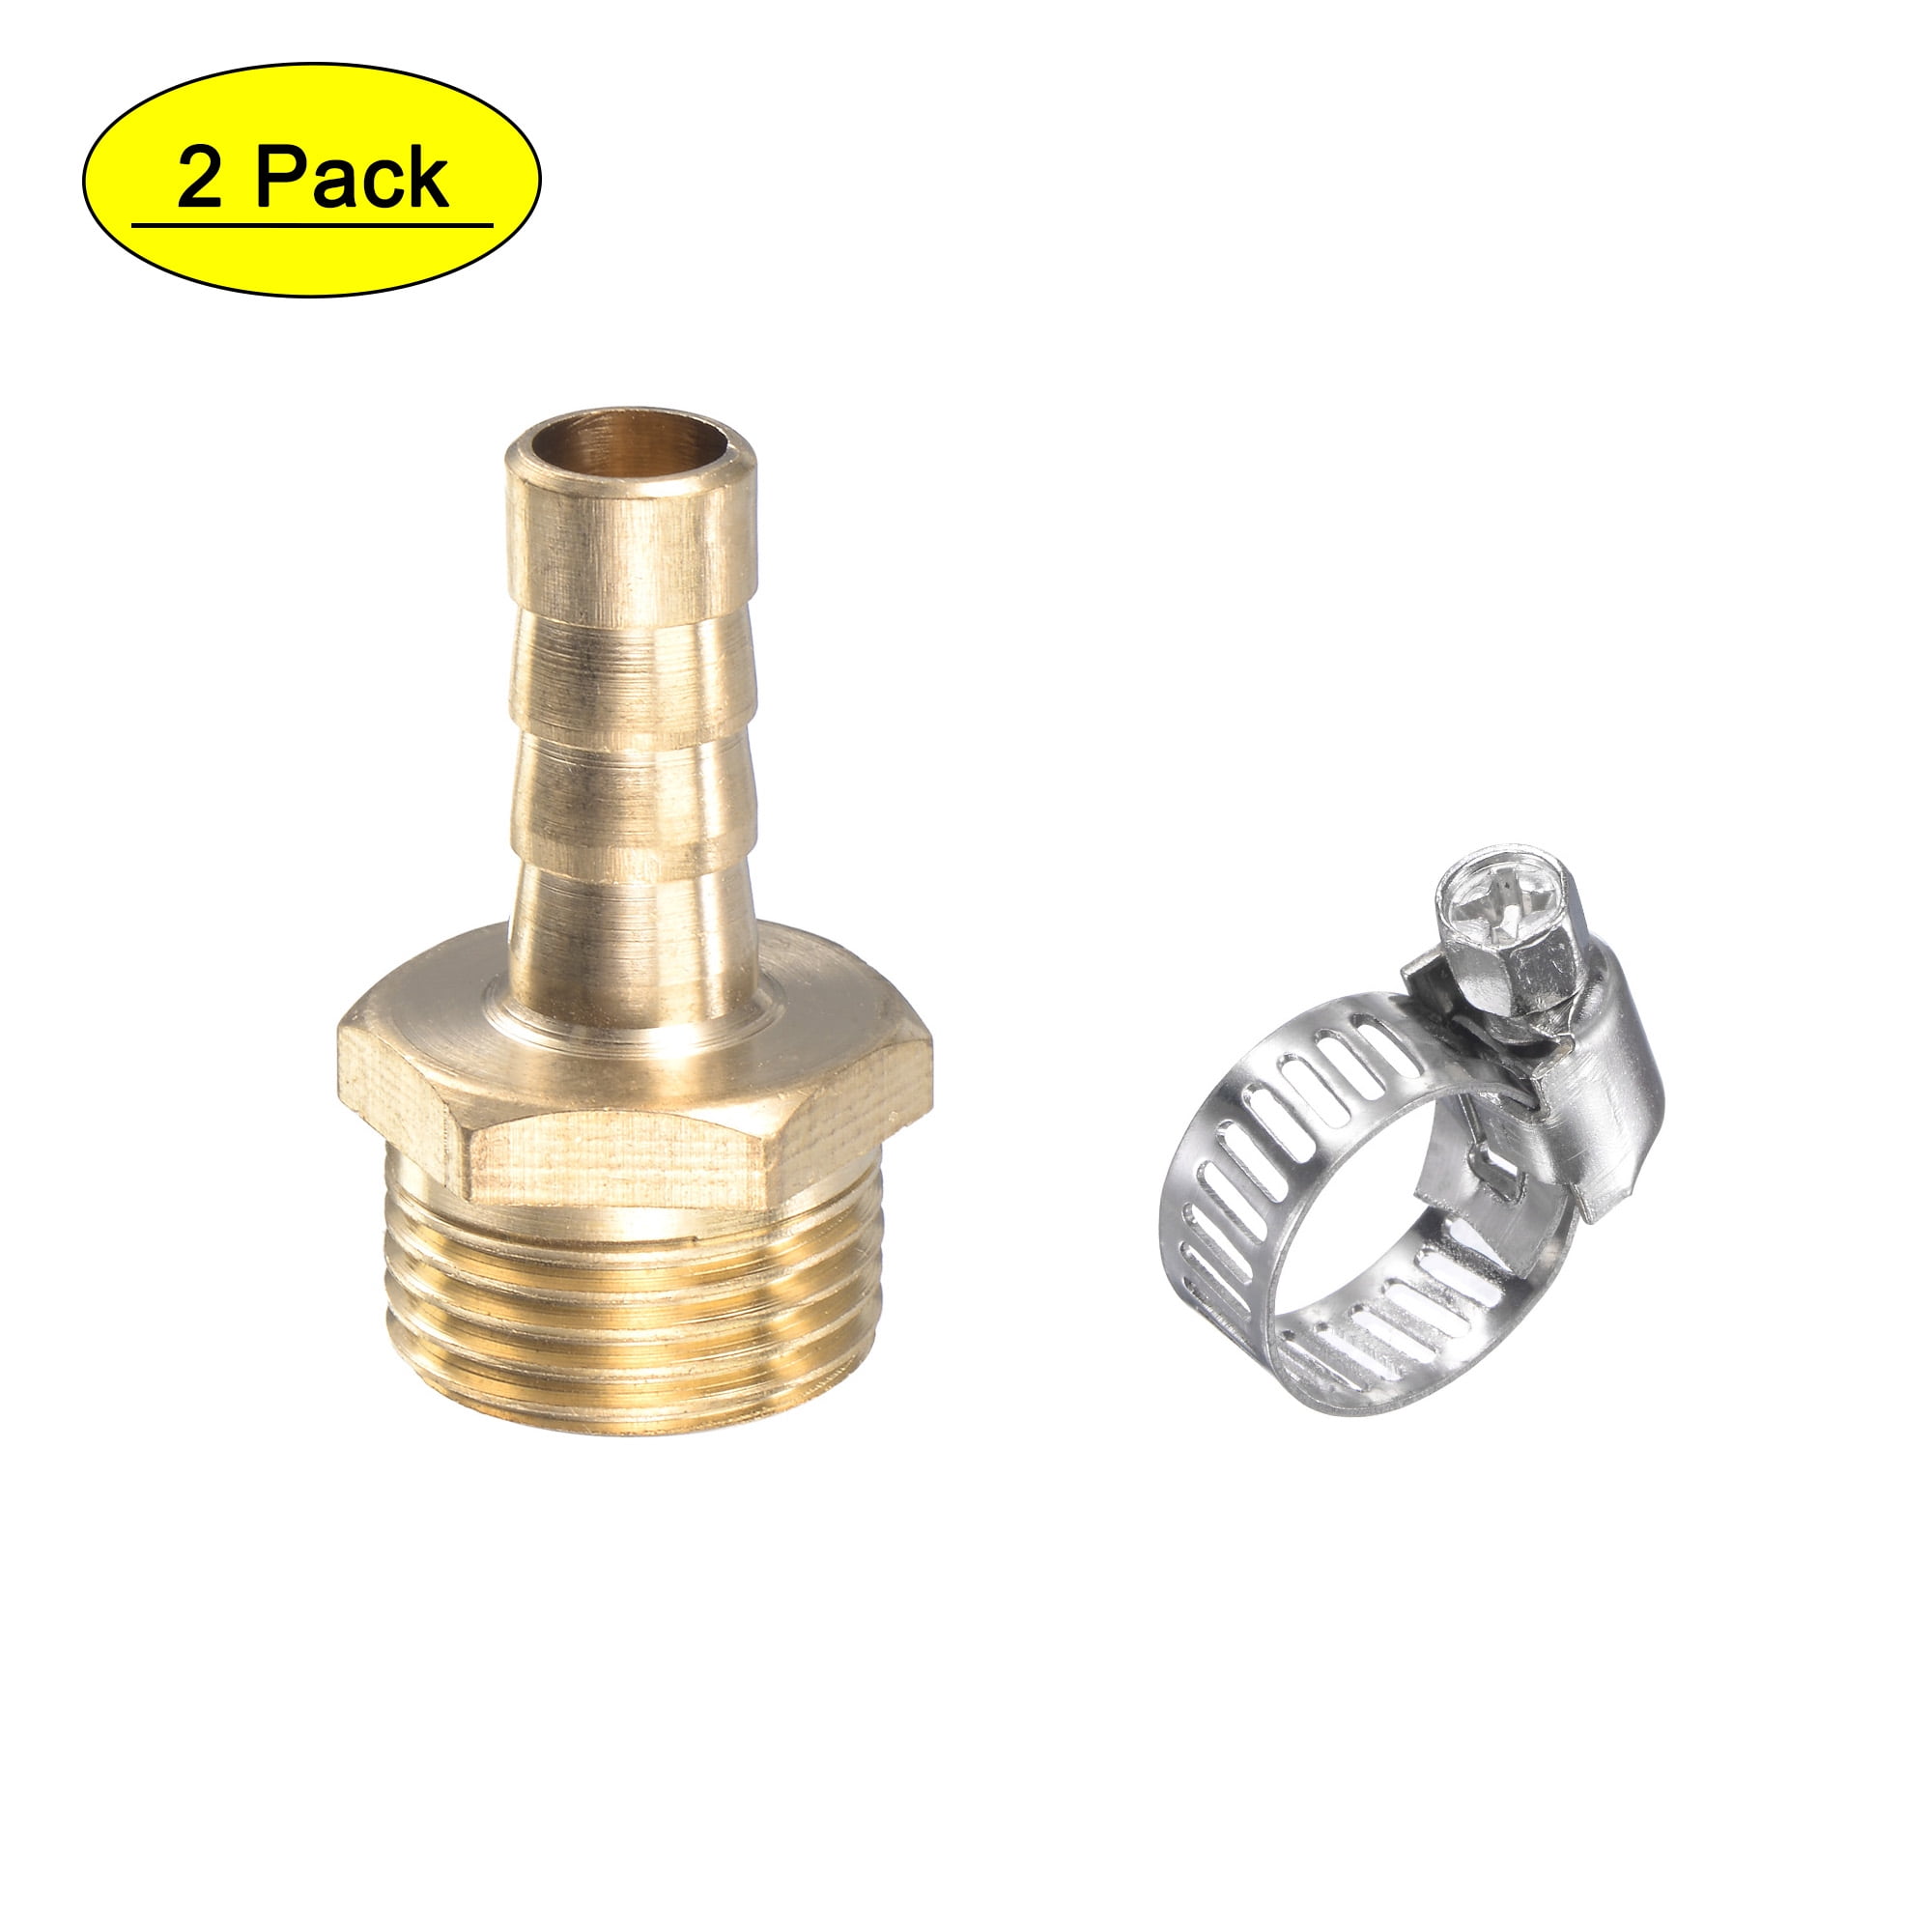 uxcell Brass Compression Tube Fitting 8mm OD Straight Pipe Adapter for Water Garden Irrigation System 2pcs 